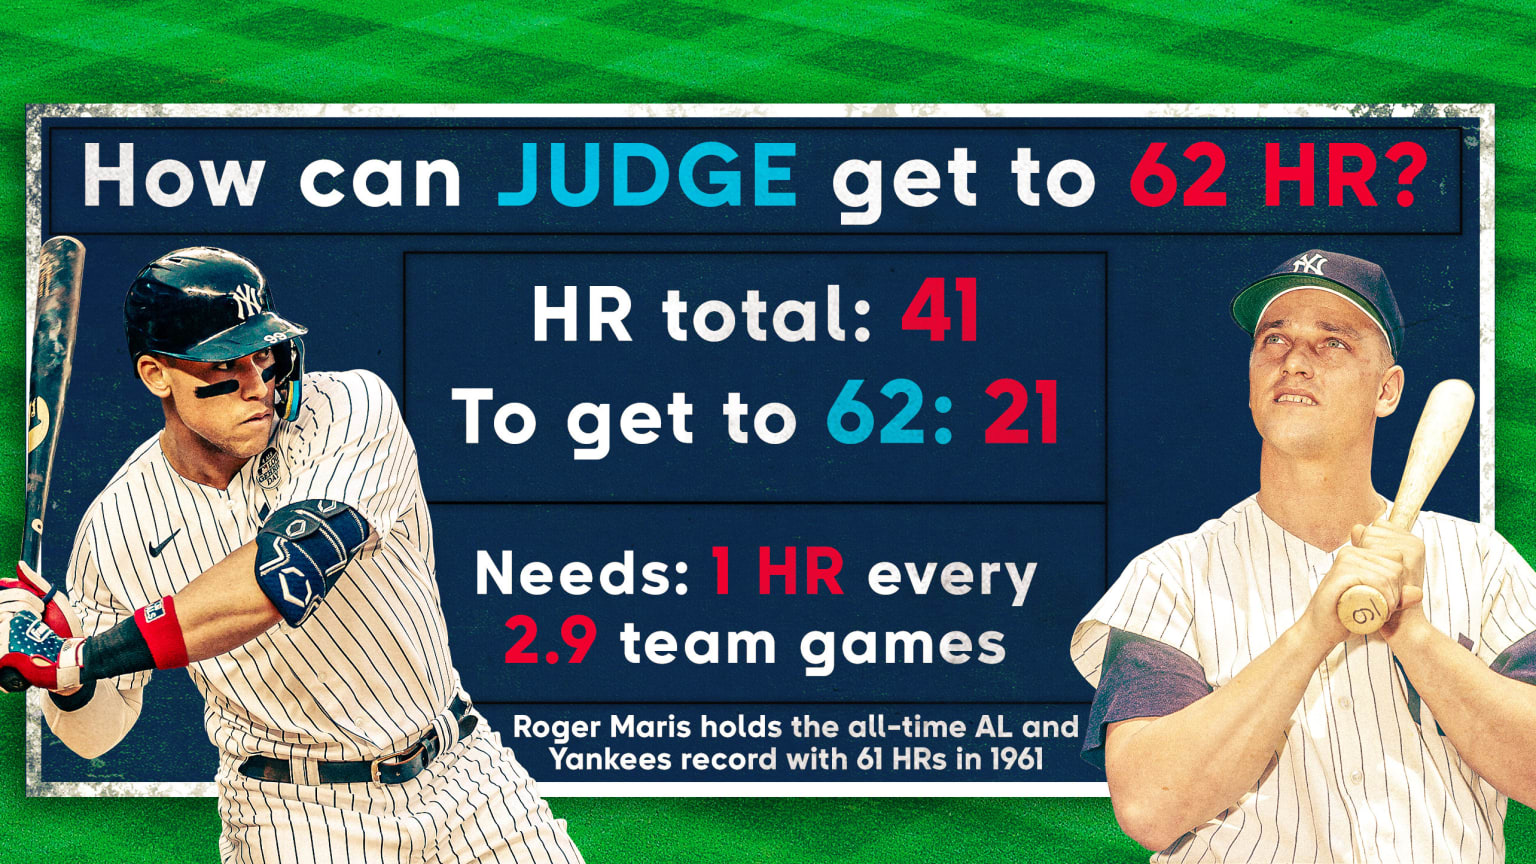 Images of Aaron Judge and Roger Maris over a blue rectangle made to look like a scoreboard. The board shows Judge's home run total of 41, that he needs 21 home runs to get to 62 and the pace he needs to maintain is 1 home run ever 2.9 team games